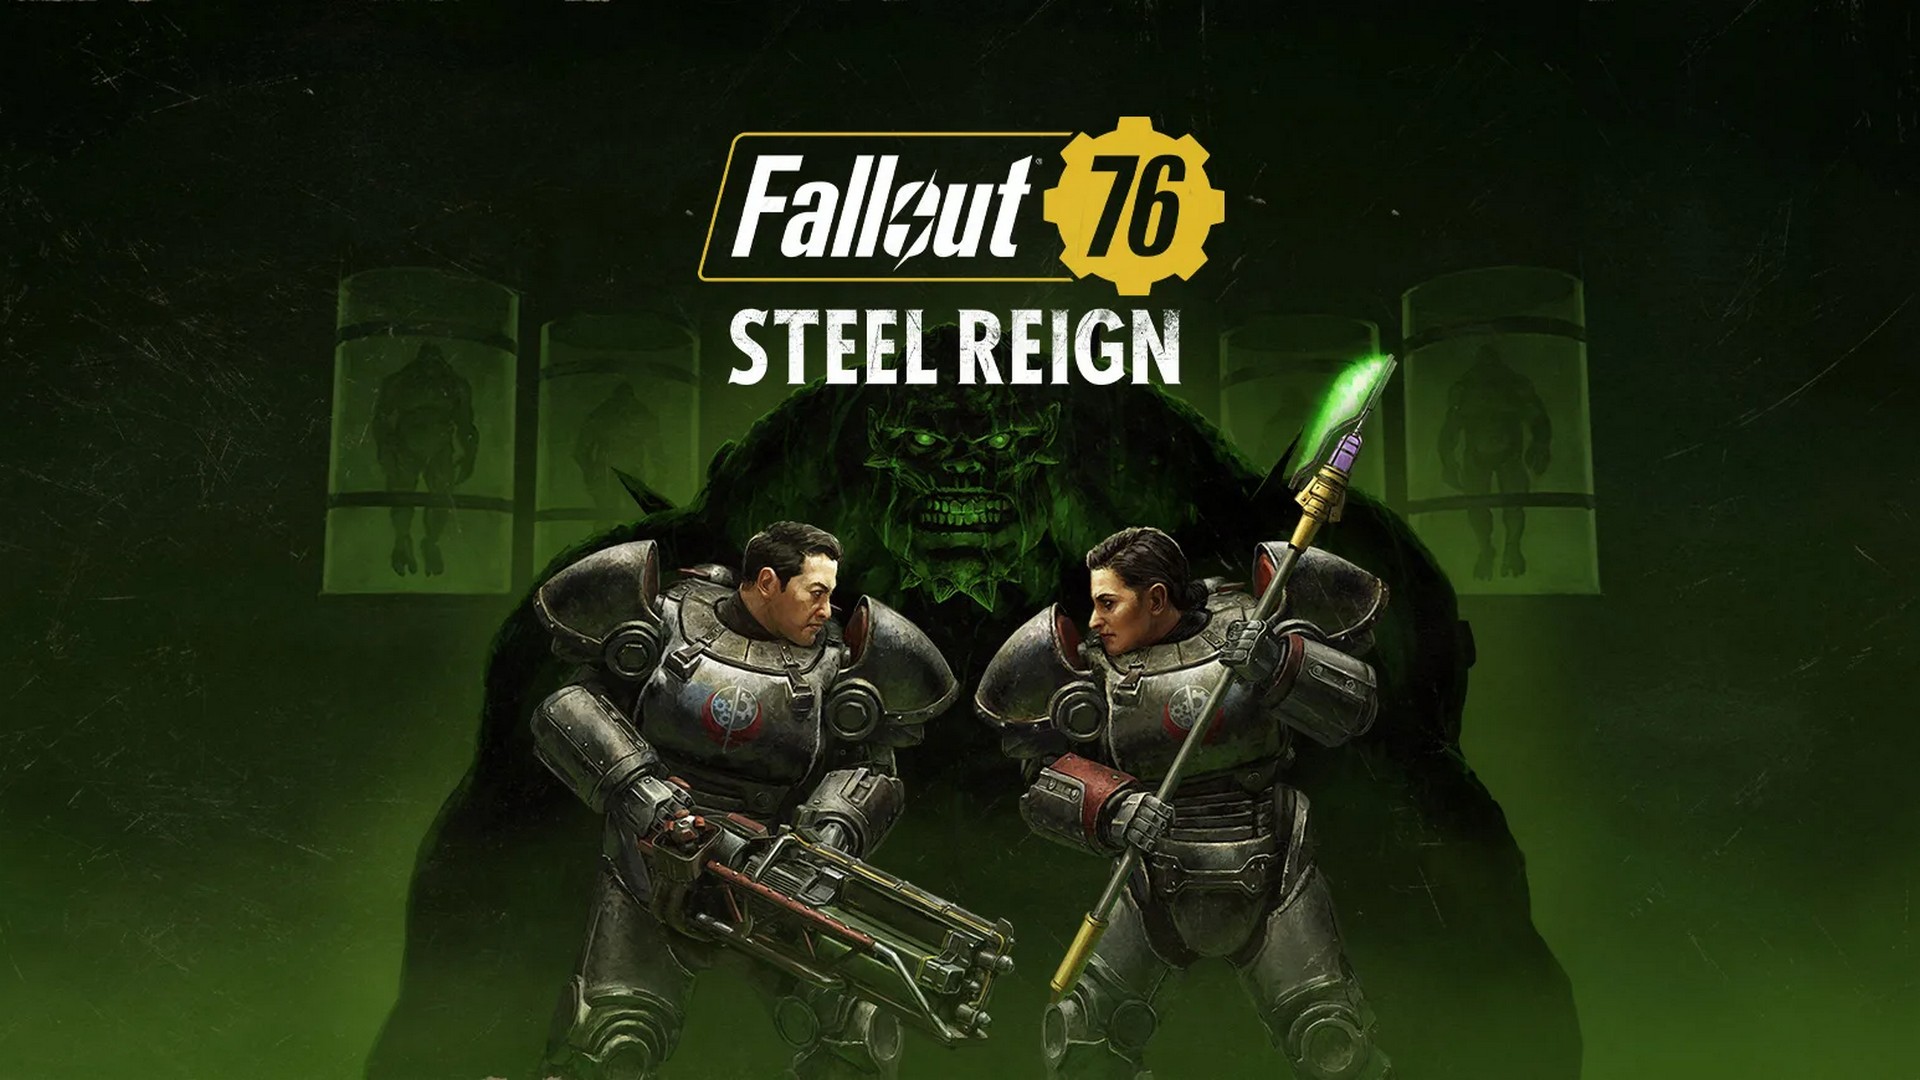 Fallout 76: Steel Reign Update Available Now, Free For All Players